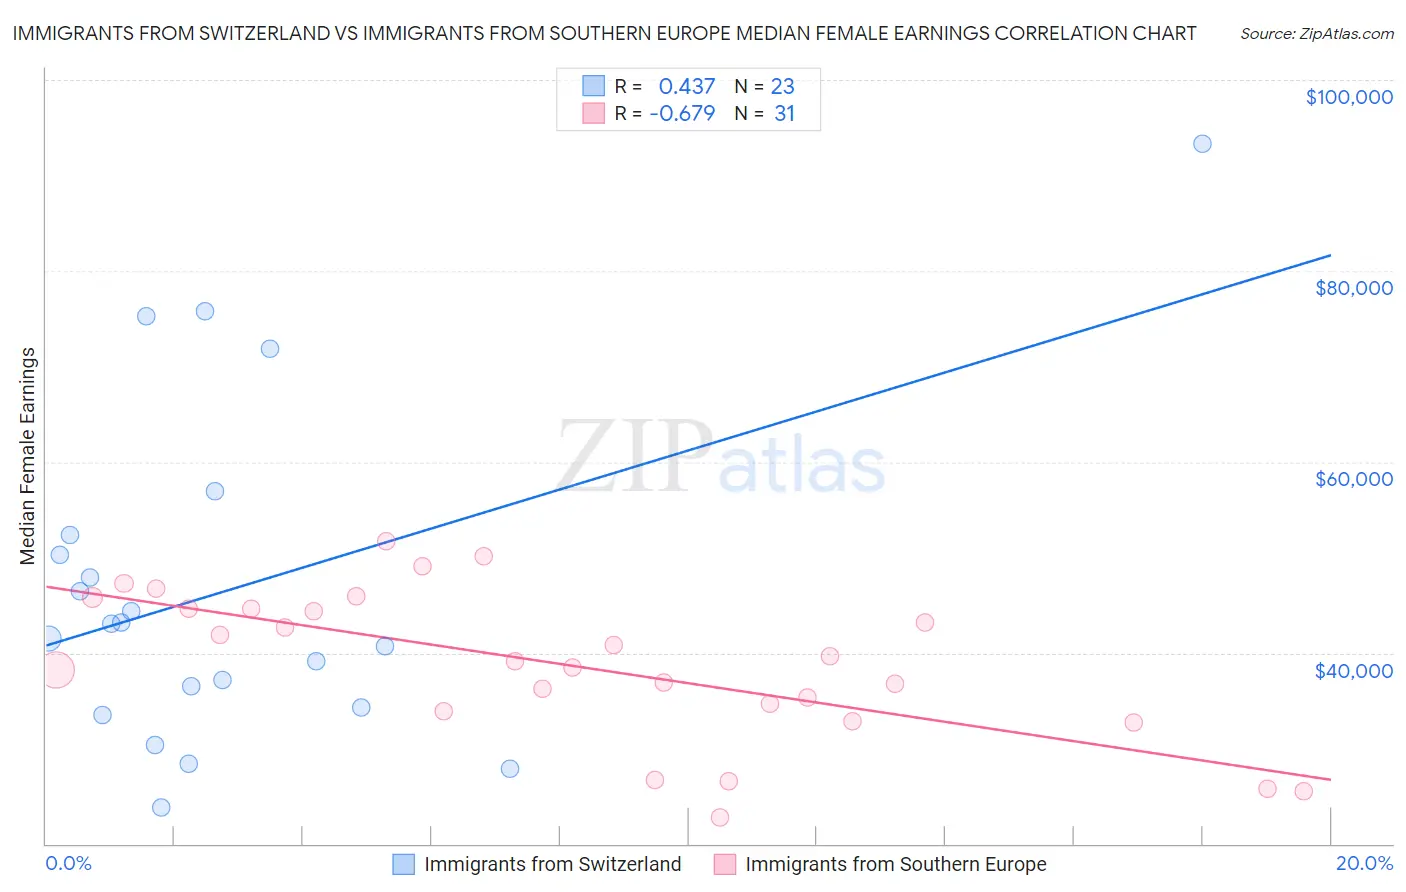 Immigrants from Switzerland vs Immigrants from Southern Europe Median Female Earnings